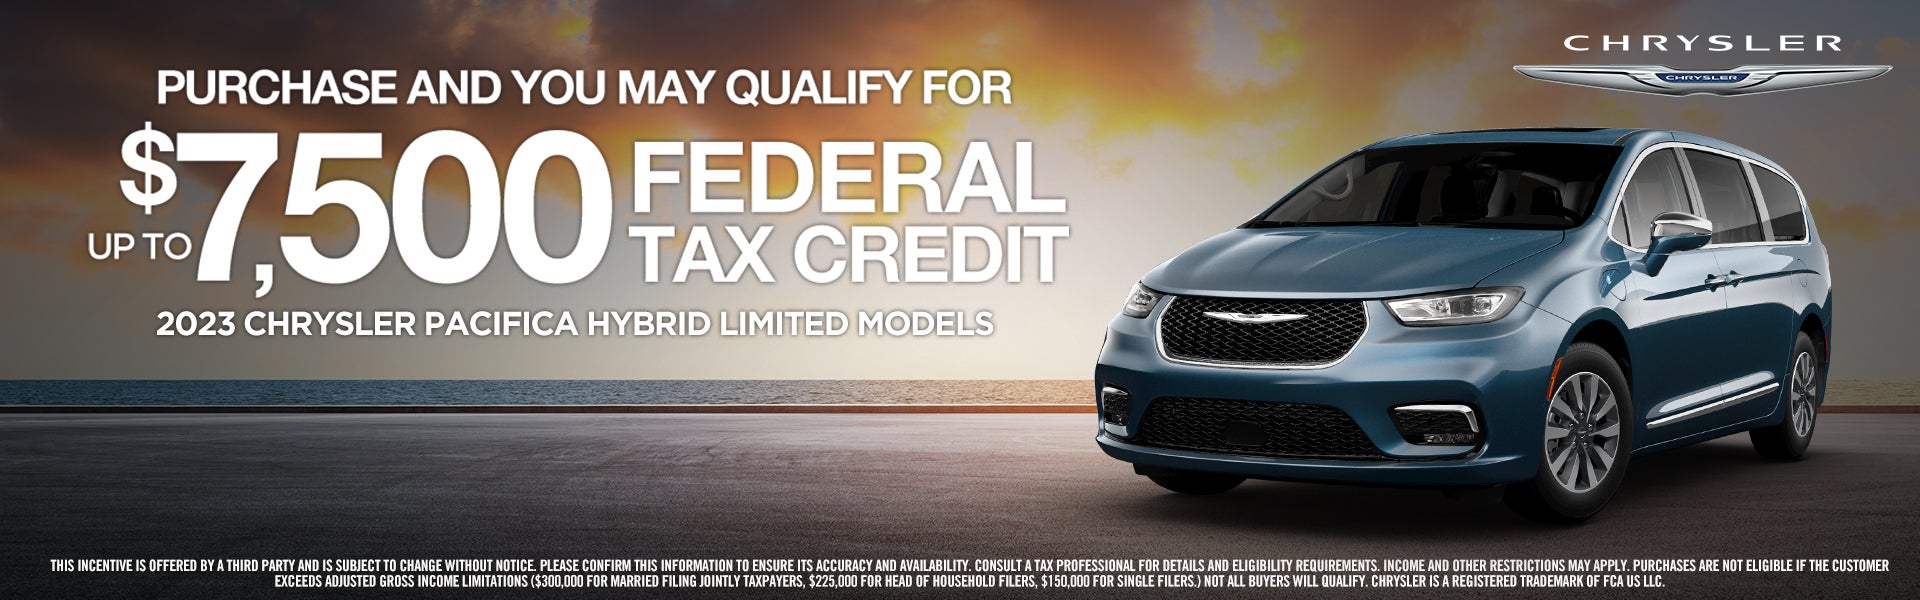 23 Chrysler Pacifica Hybrid Limited-up to $7500 Fed Tax Cred